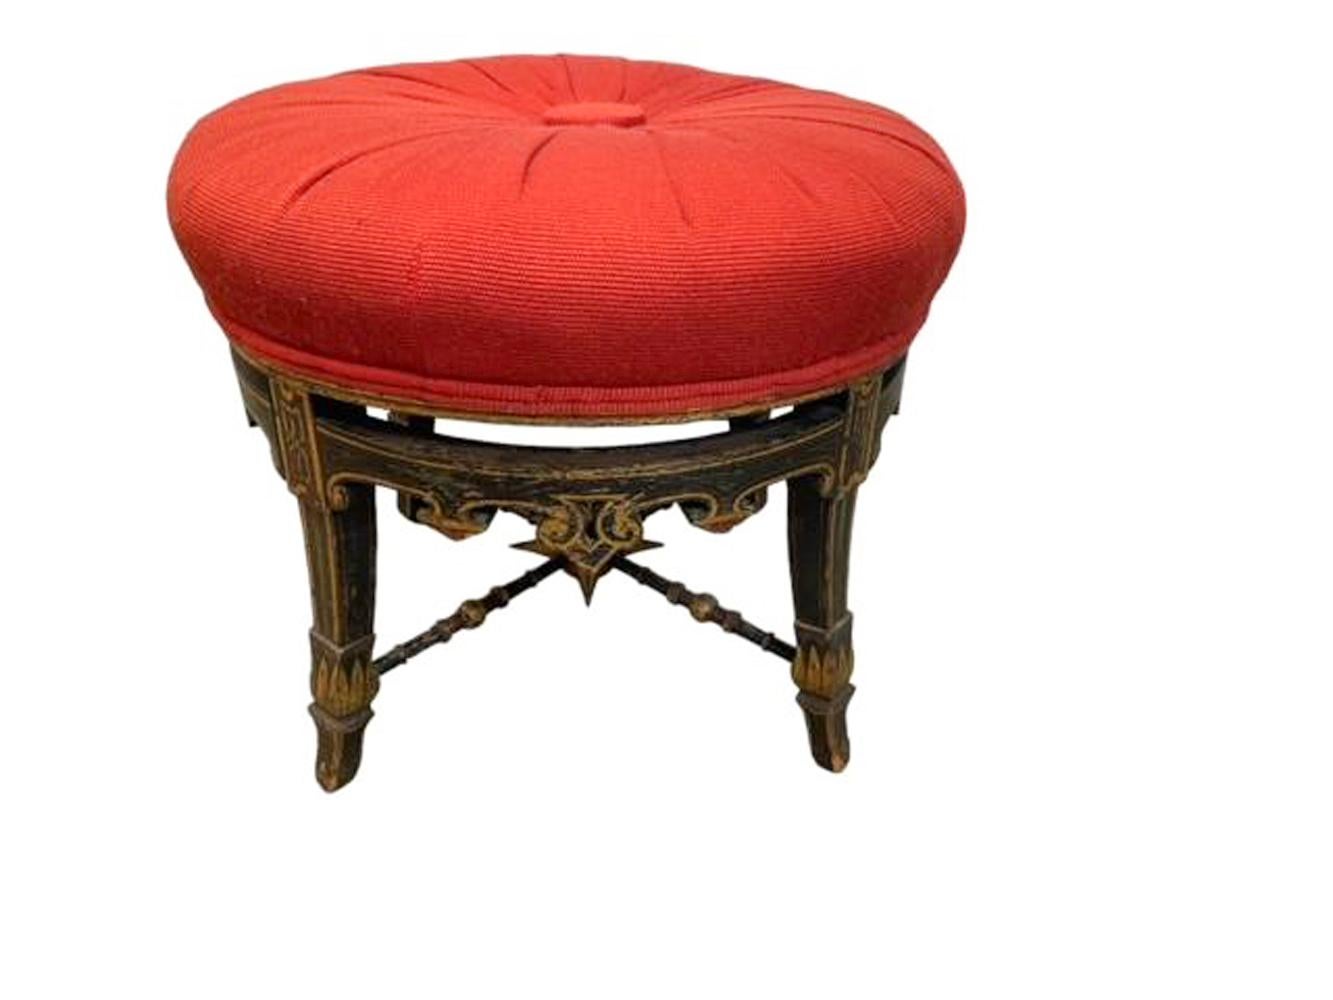 19th Century American Aesthetic Period Grain Painted Stool with Upholstered Seat In Good Condition For Sale In Chapel Hill, NC